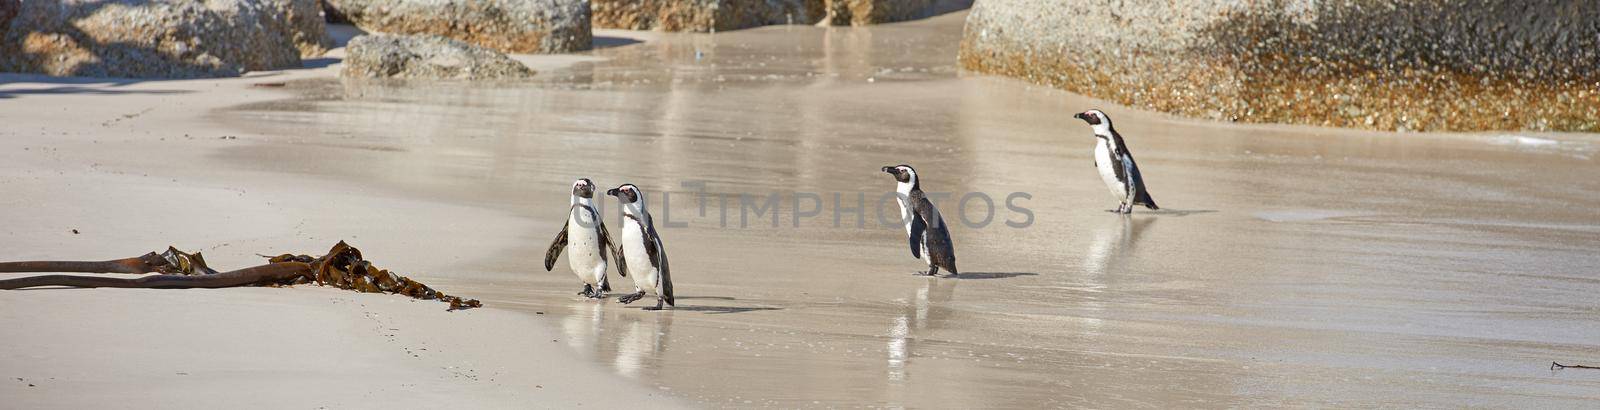 The landscape of the beach with penguins walking on the sand on a hot summer day. A small colony of arctic animals or birds outdoors on the ocean shore on a sunny afternoon at Boulders Beach.